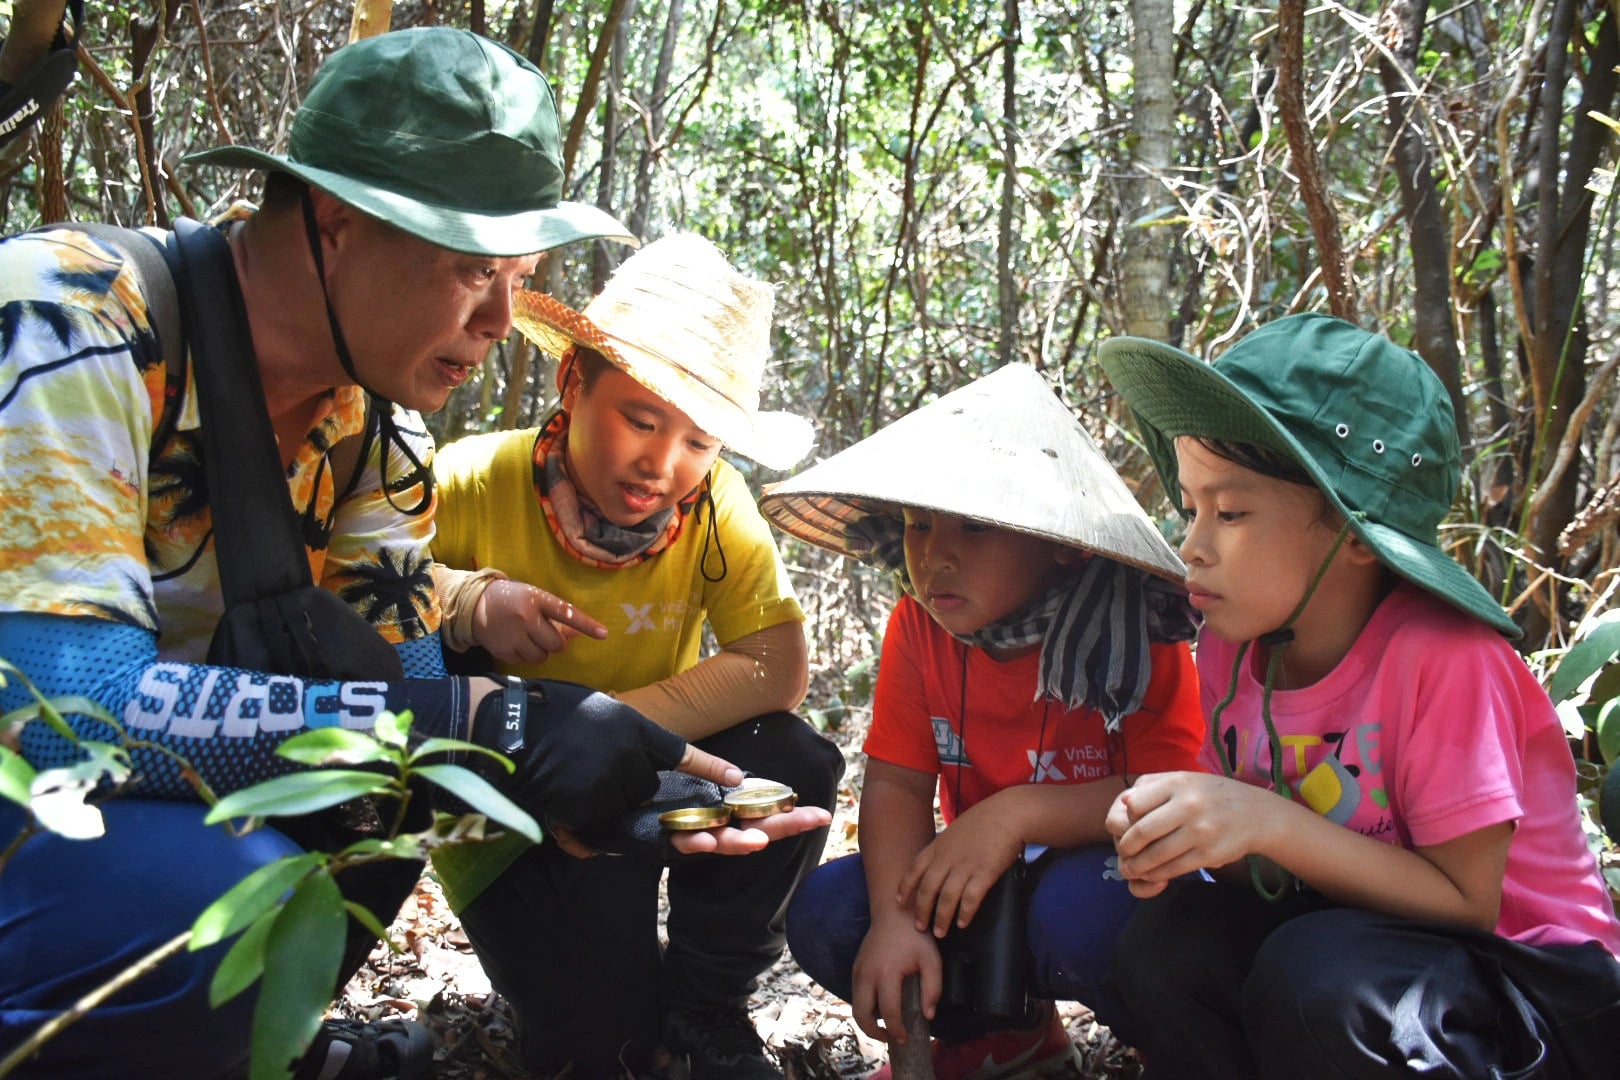 A man instructs the children how to use a compass in the forest. Photo: Tran Hoai